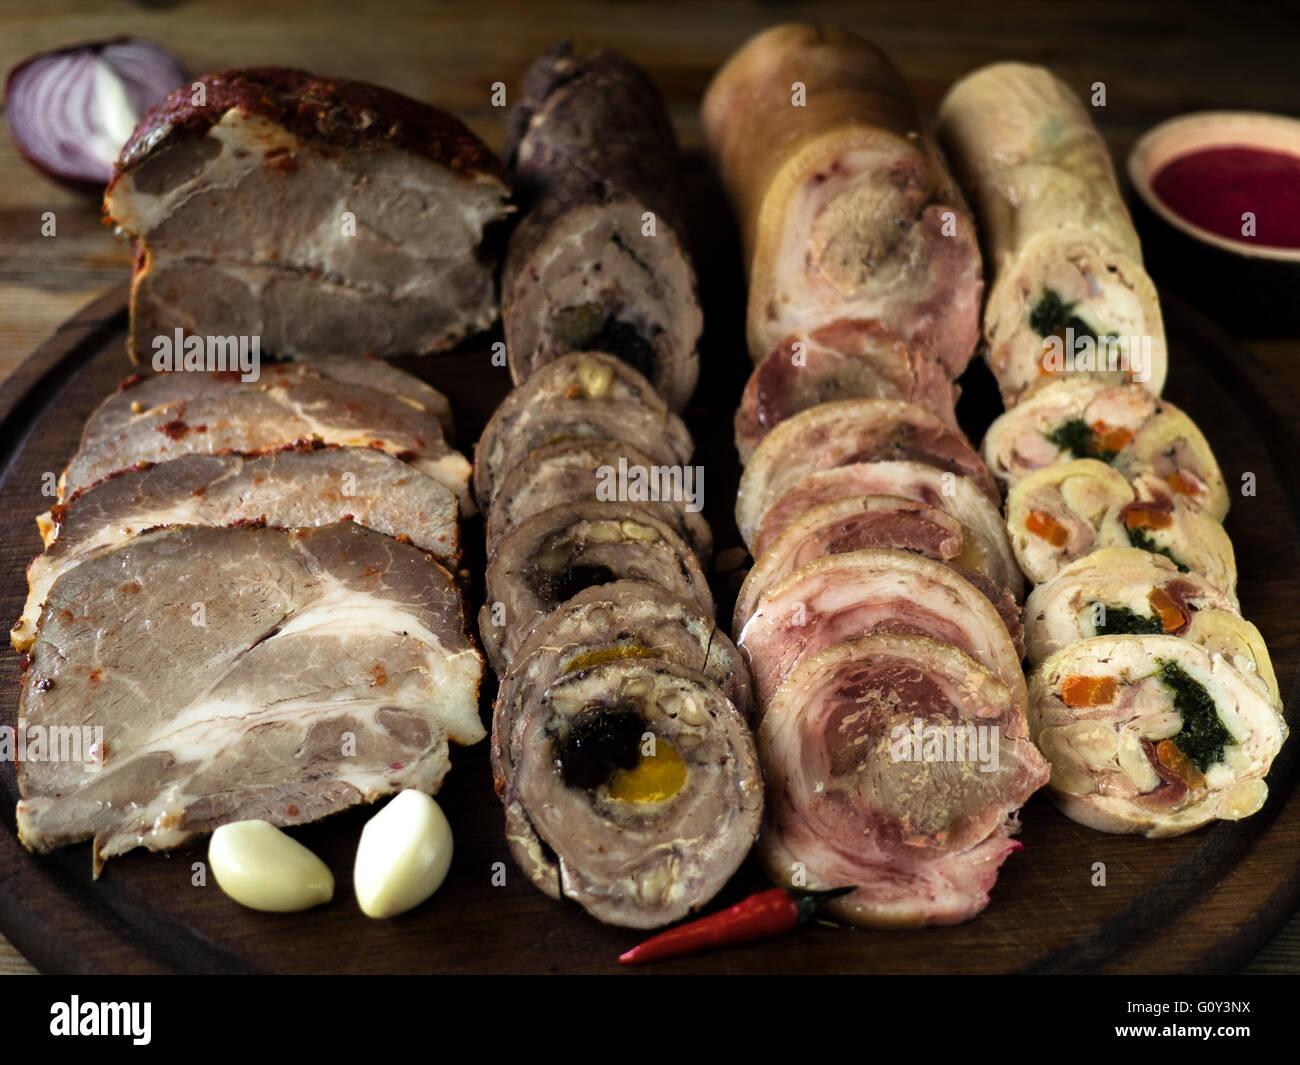 Baked meat and sliced meat rolls, Ukraine Stock Photo